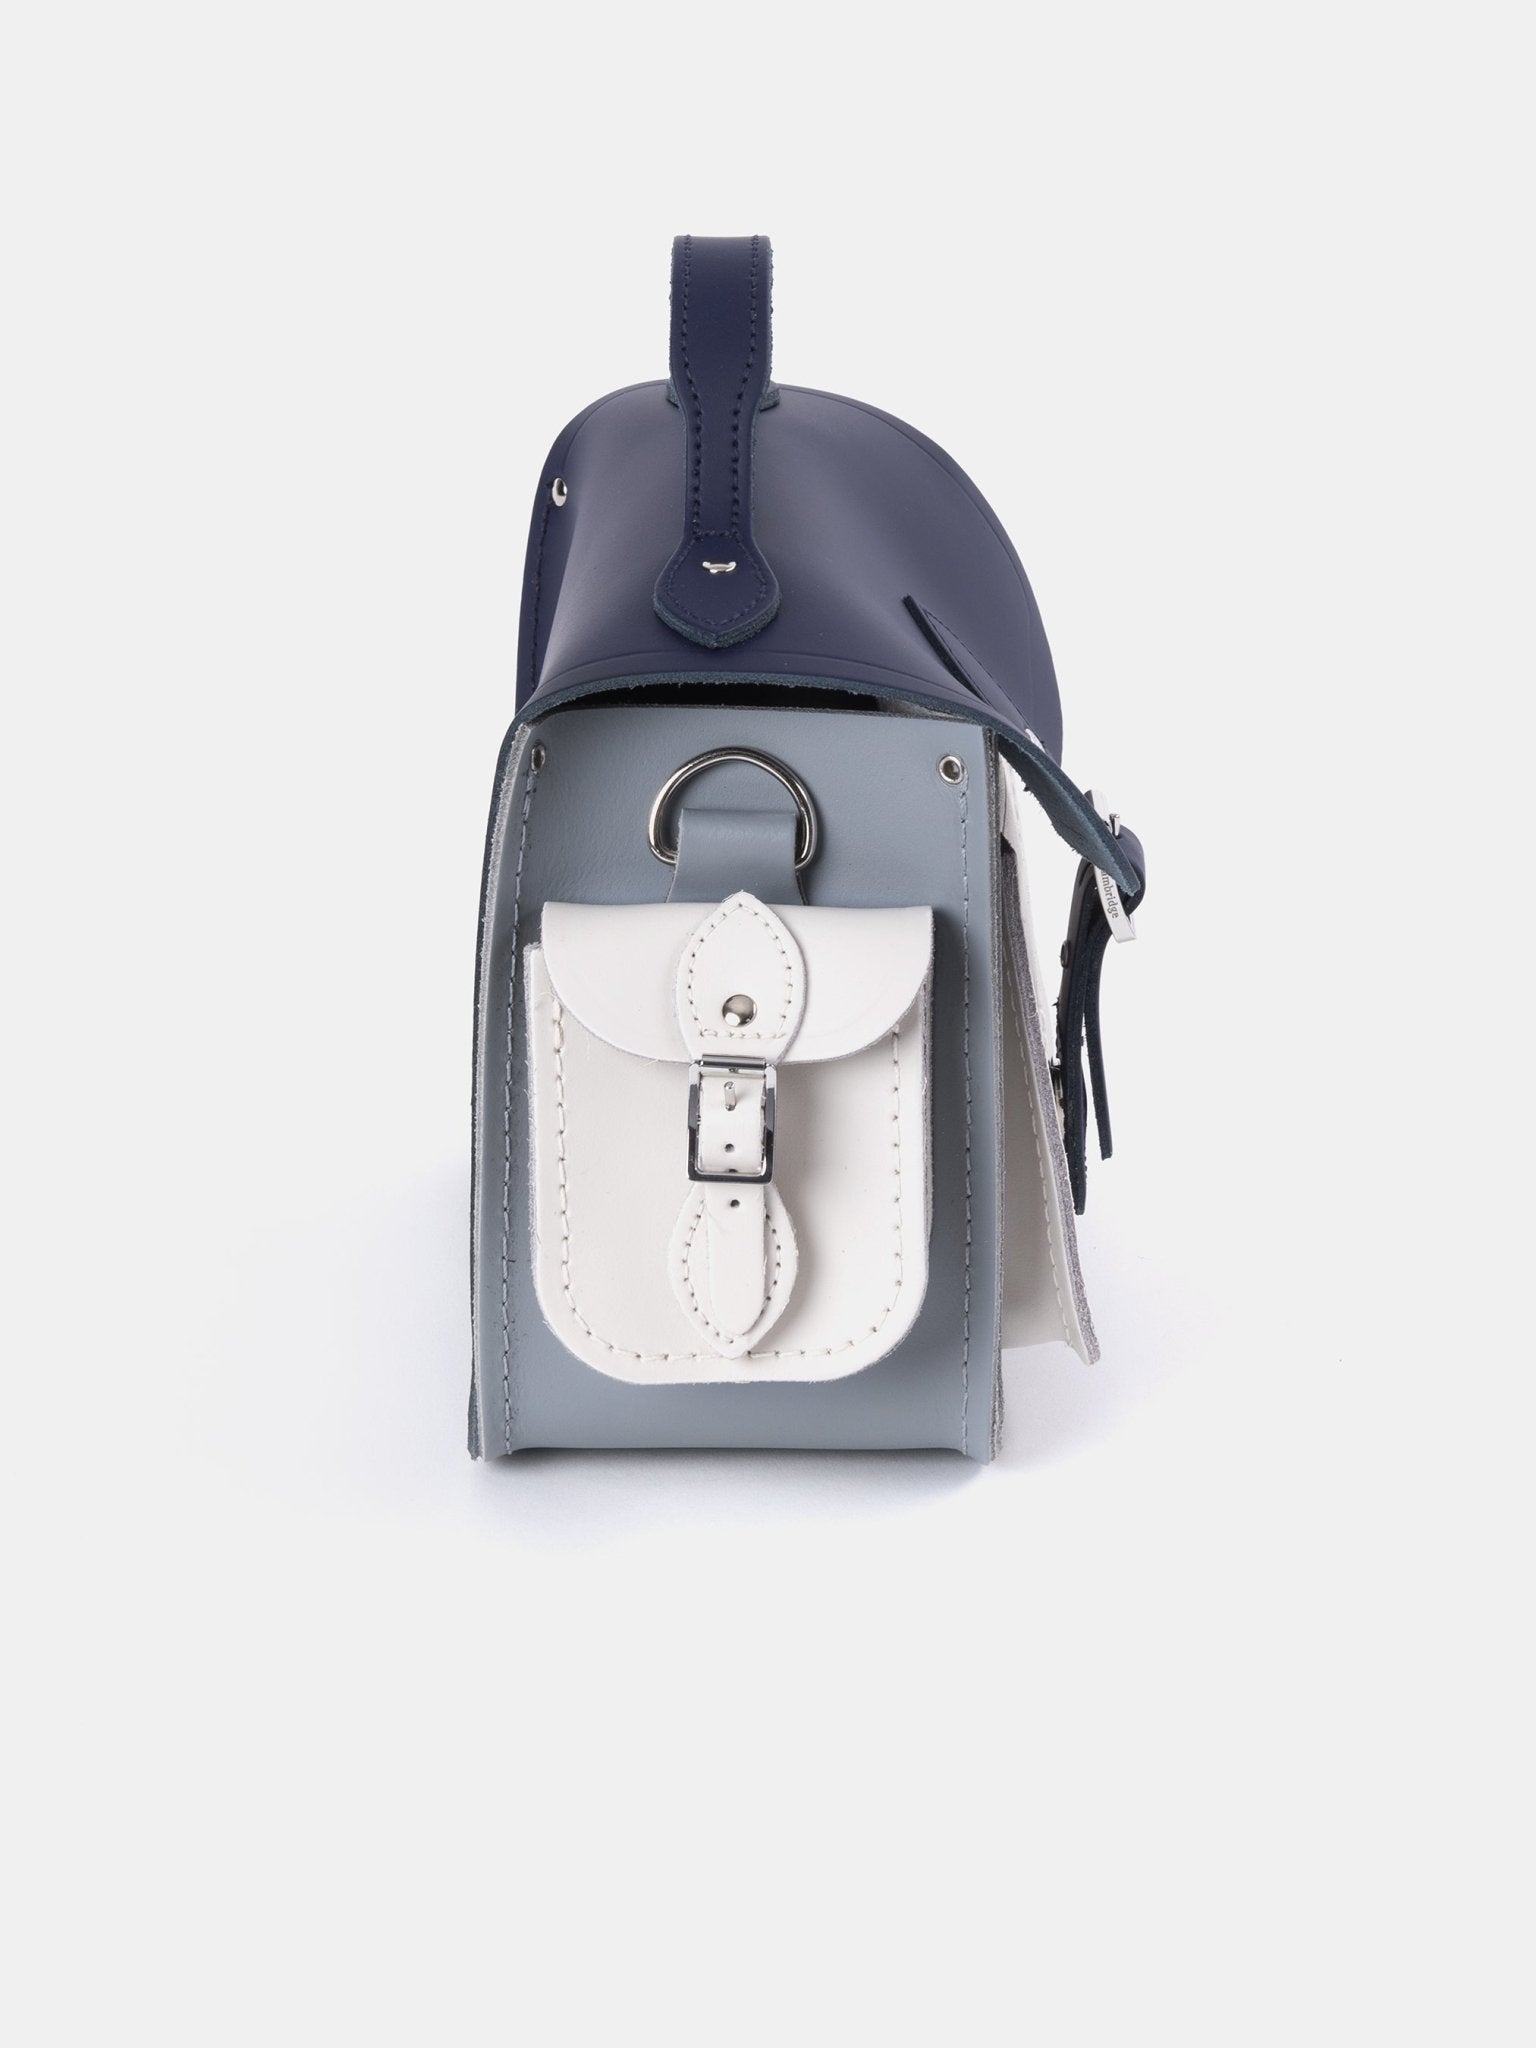 The Traveller - Midnight Picnic Matte, French Grey & Clay - The Cambridge Satchel Company UK Store